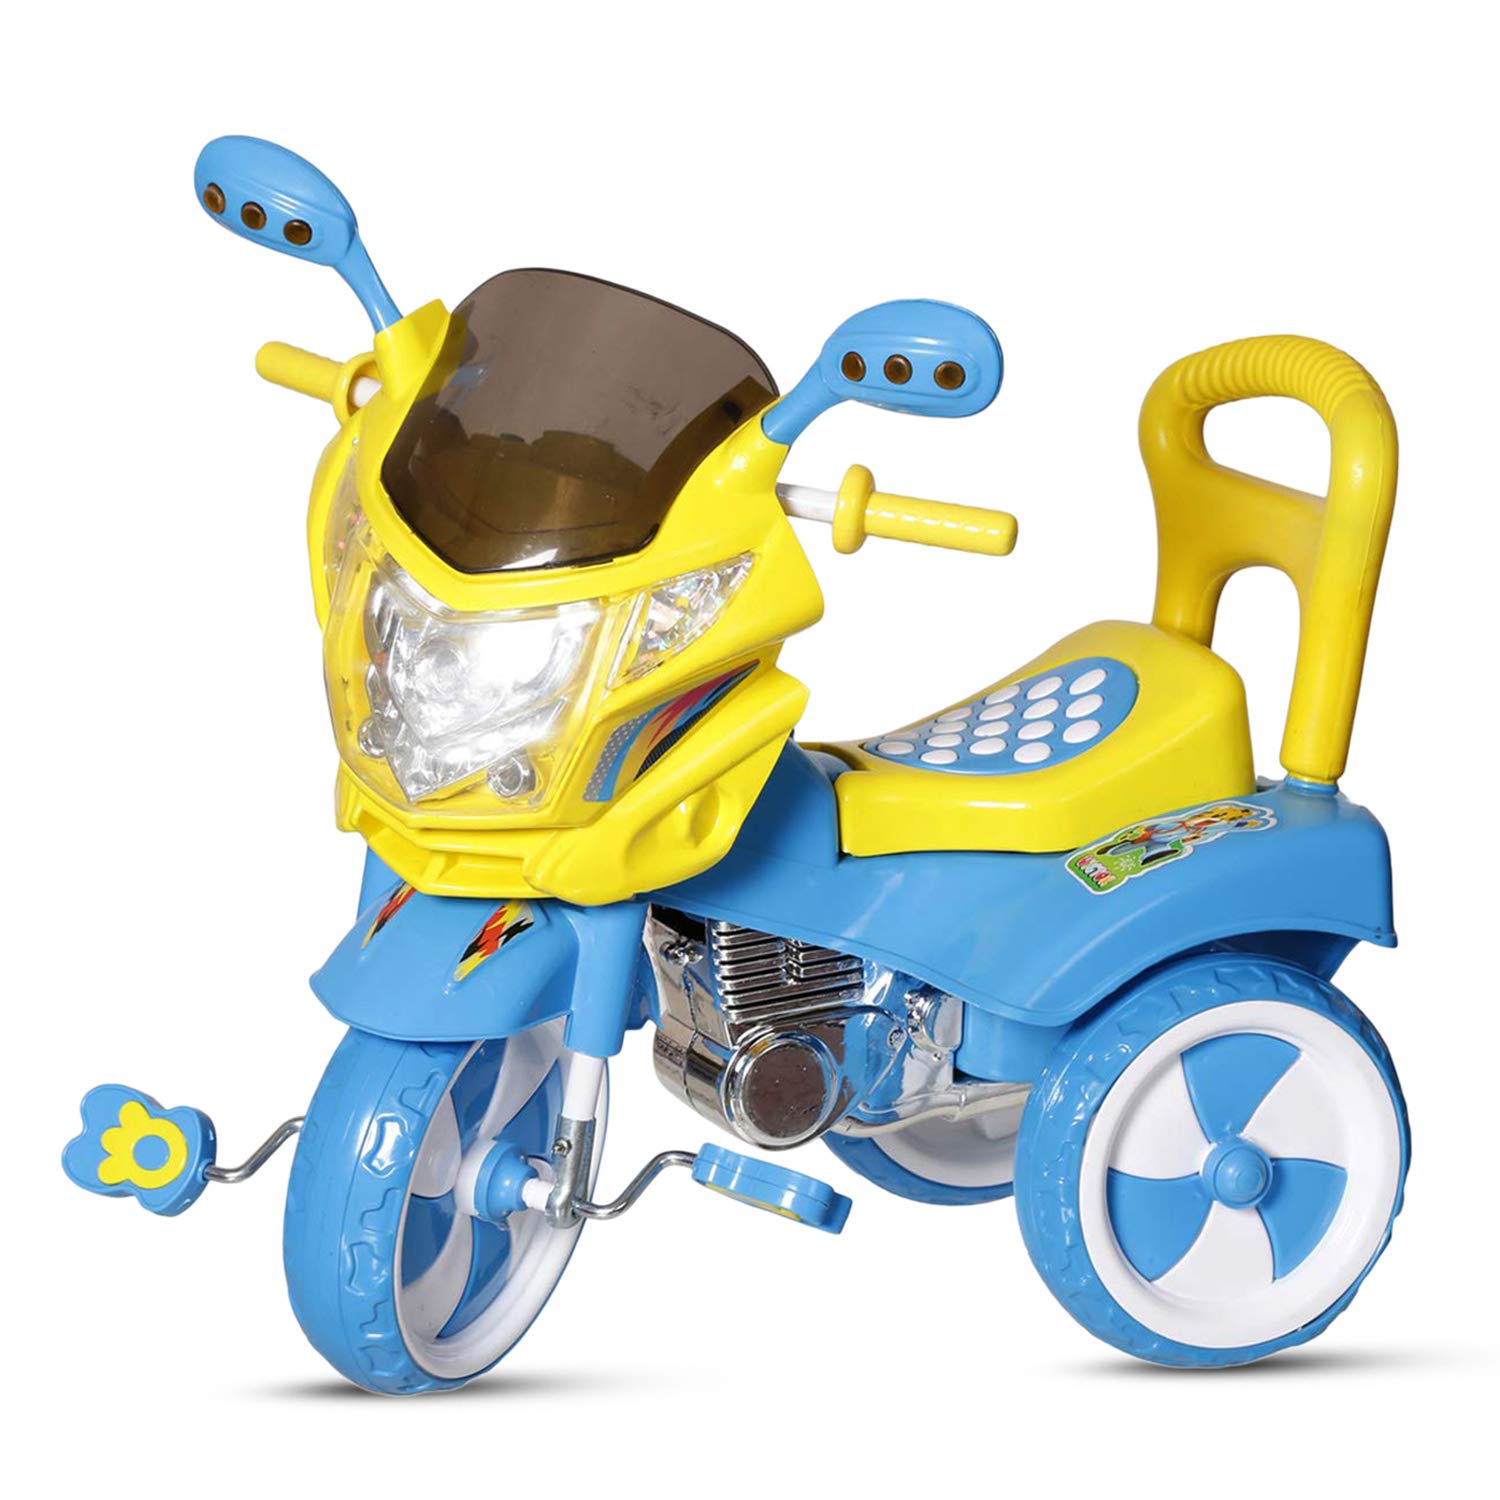 Safe and Stylish Kids’ Tricycle Designs